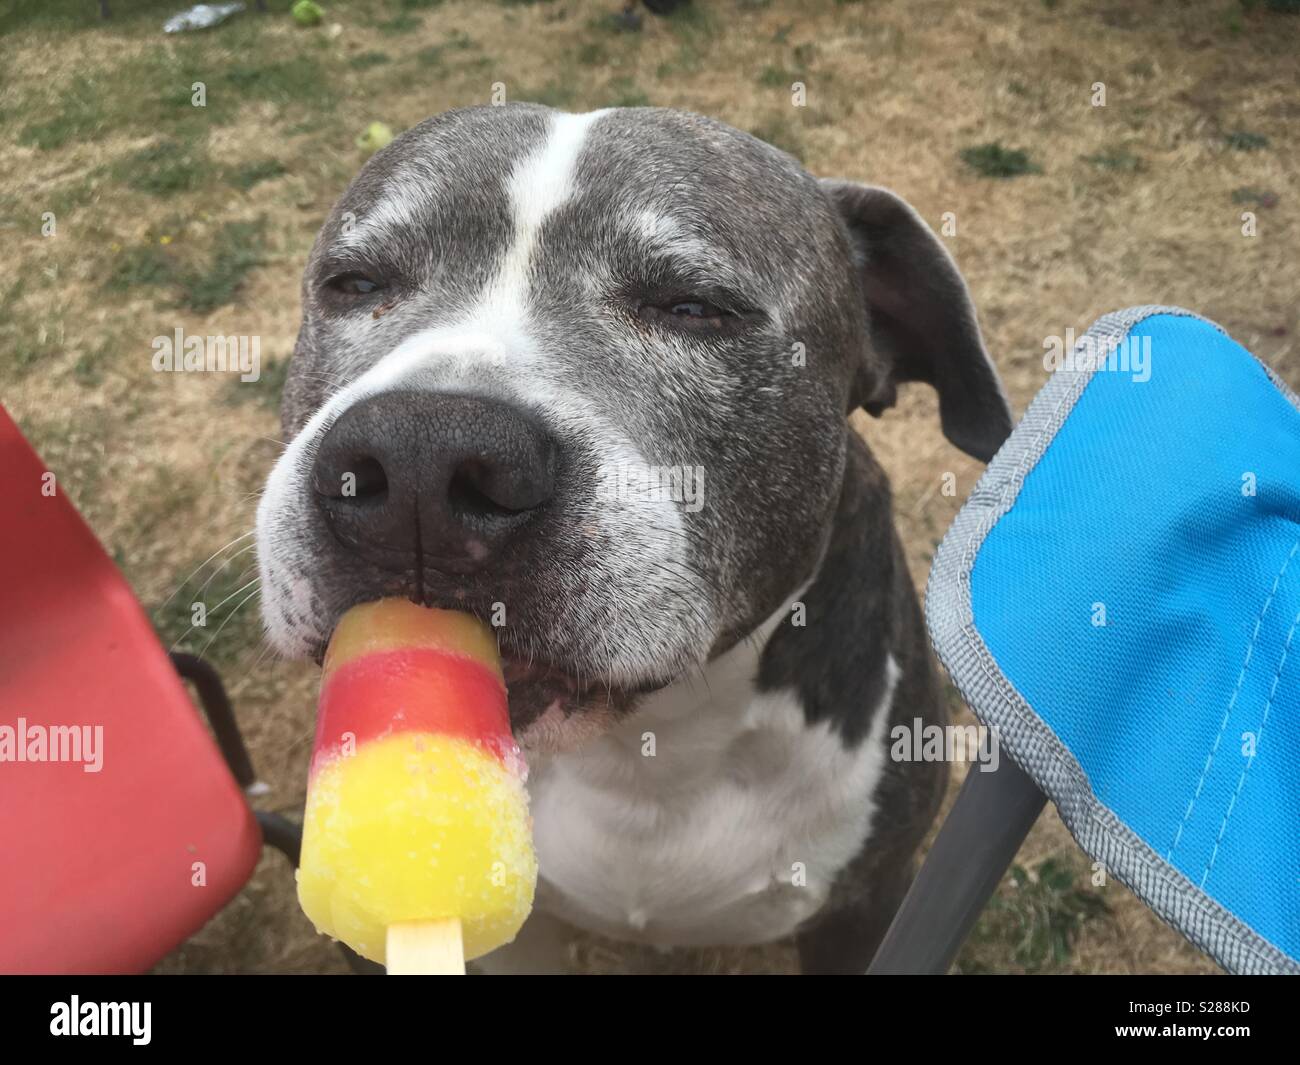 Ice lolly lover Stock Photo